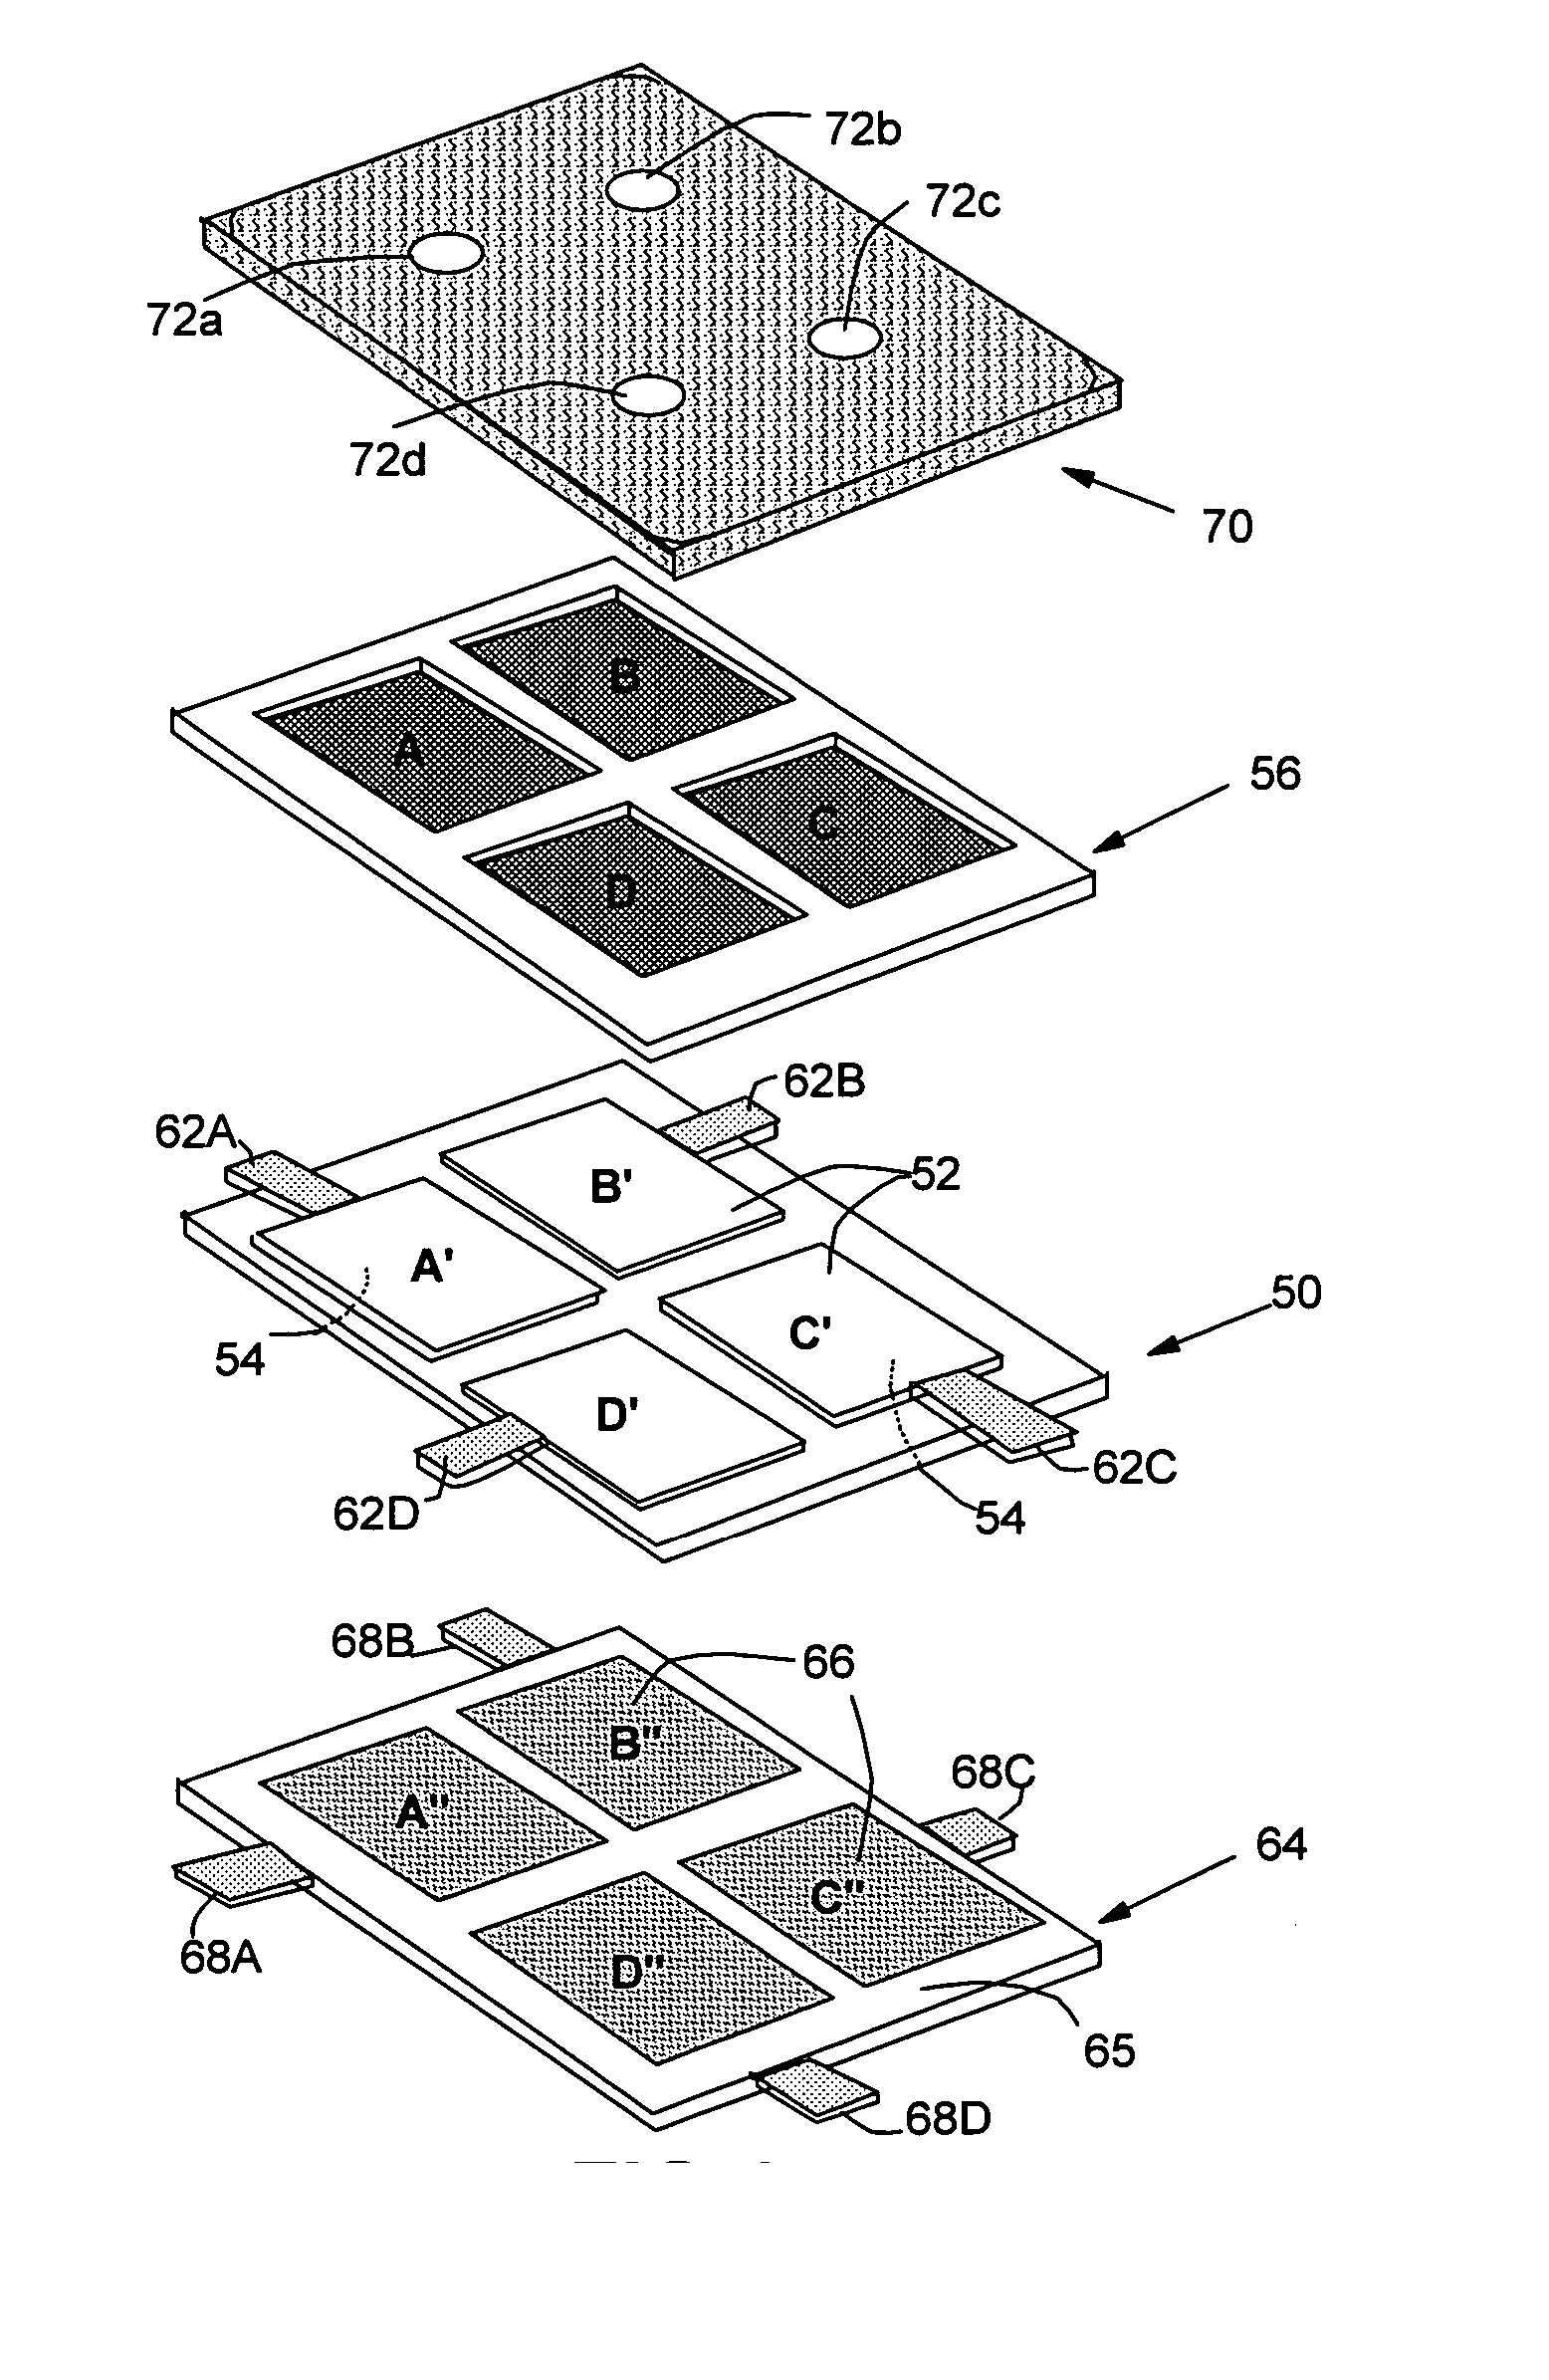 Controlled-release vapor fuel cell